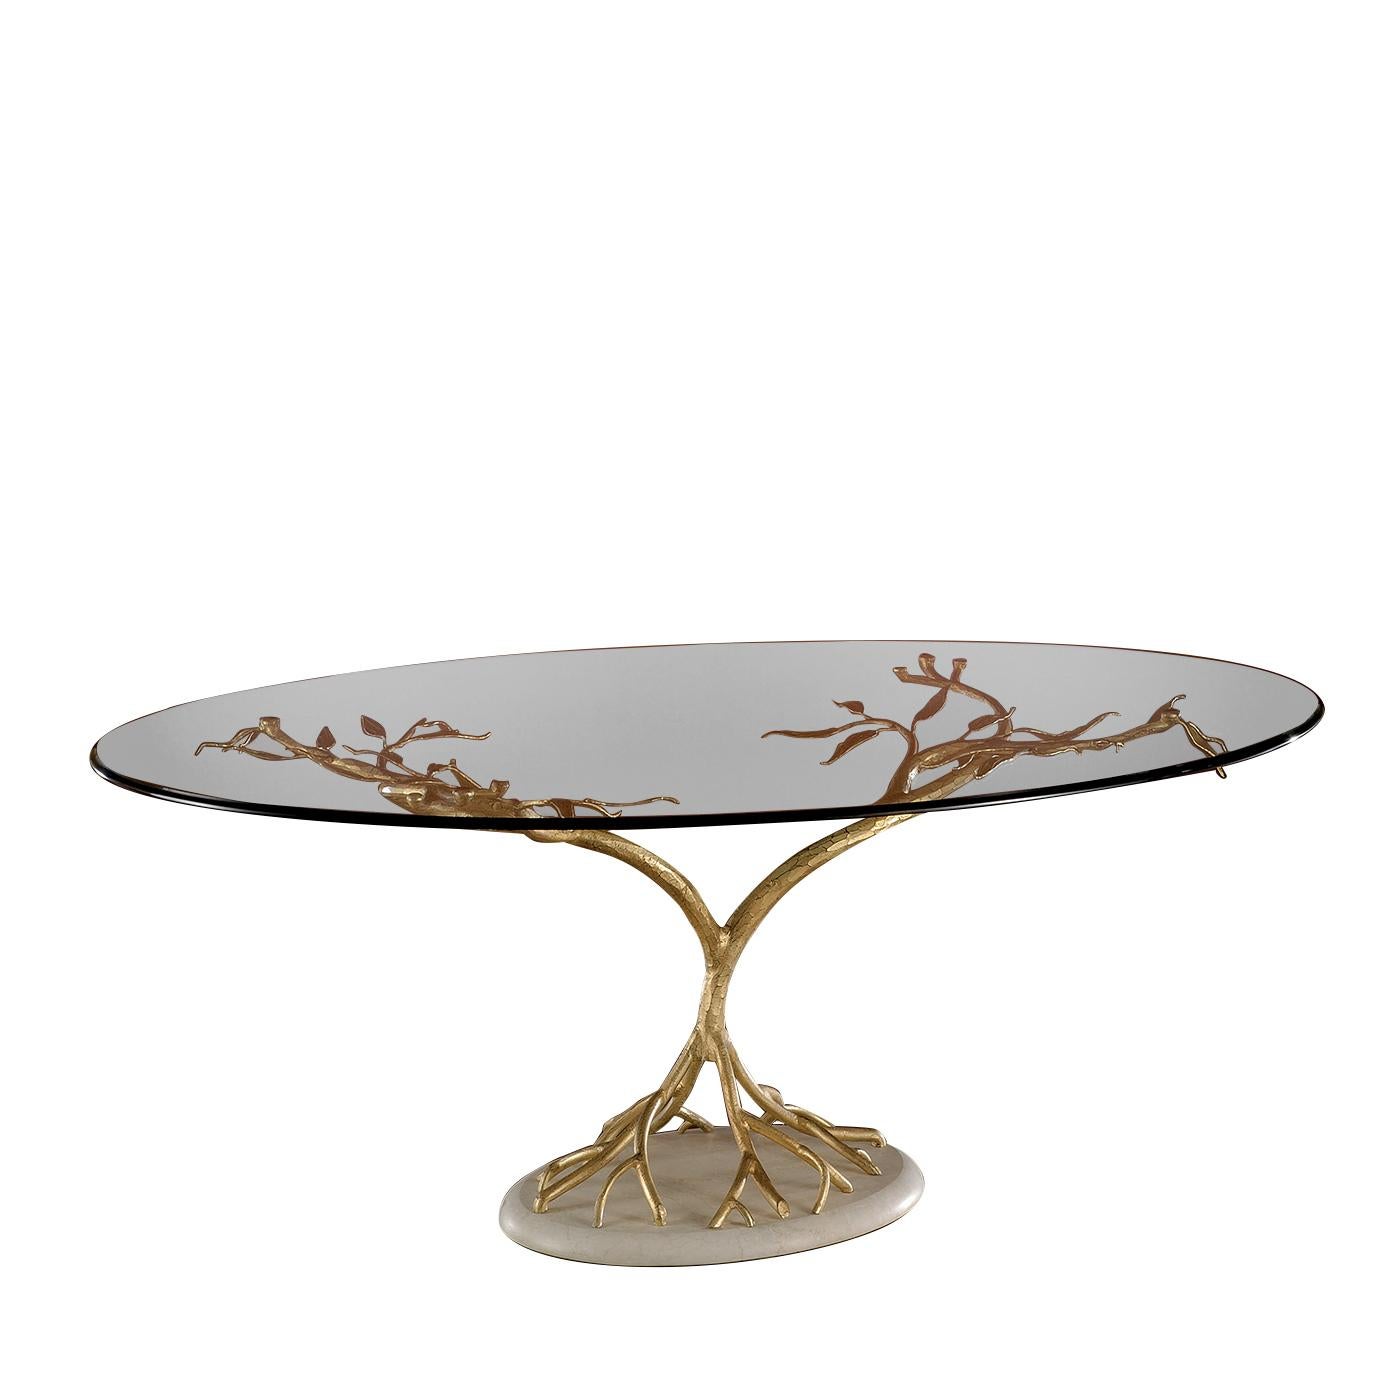 A magnificent piece of functional decor, this table will make a statement in any room, thanks to its superb craftsmanship. The use of high-quality materials and its whimsical design capture the majesty of nature with all its dynamic force. From a